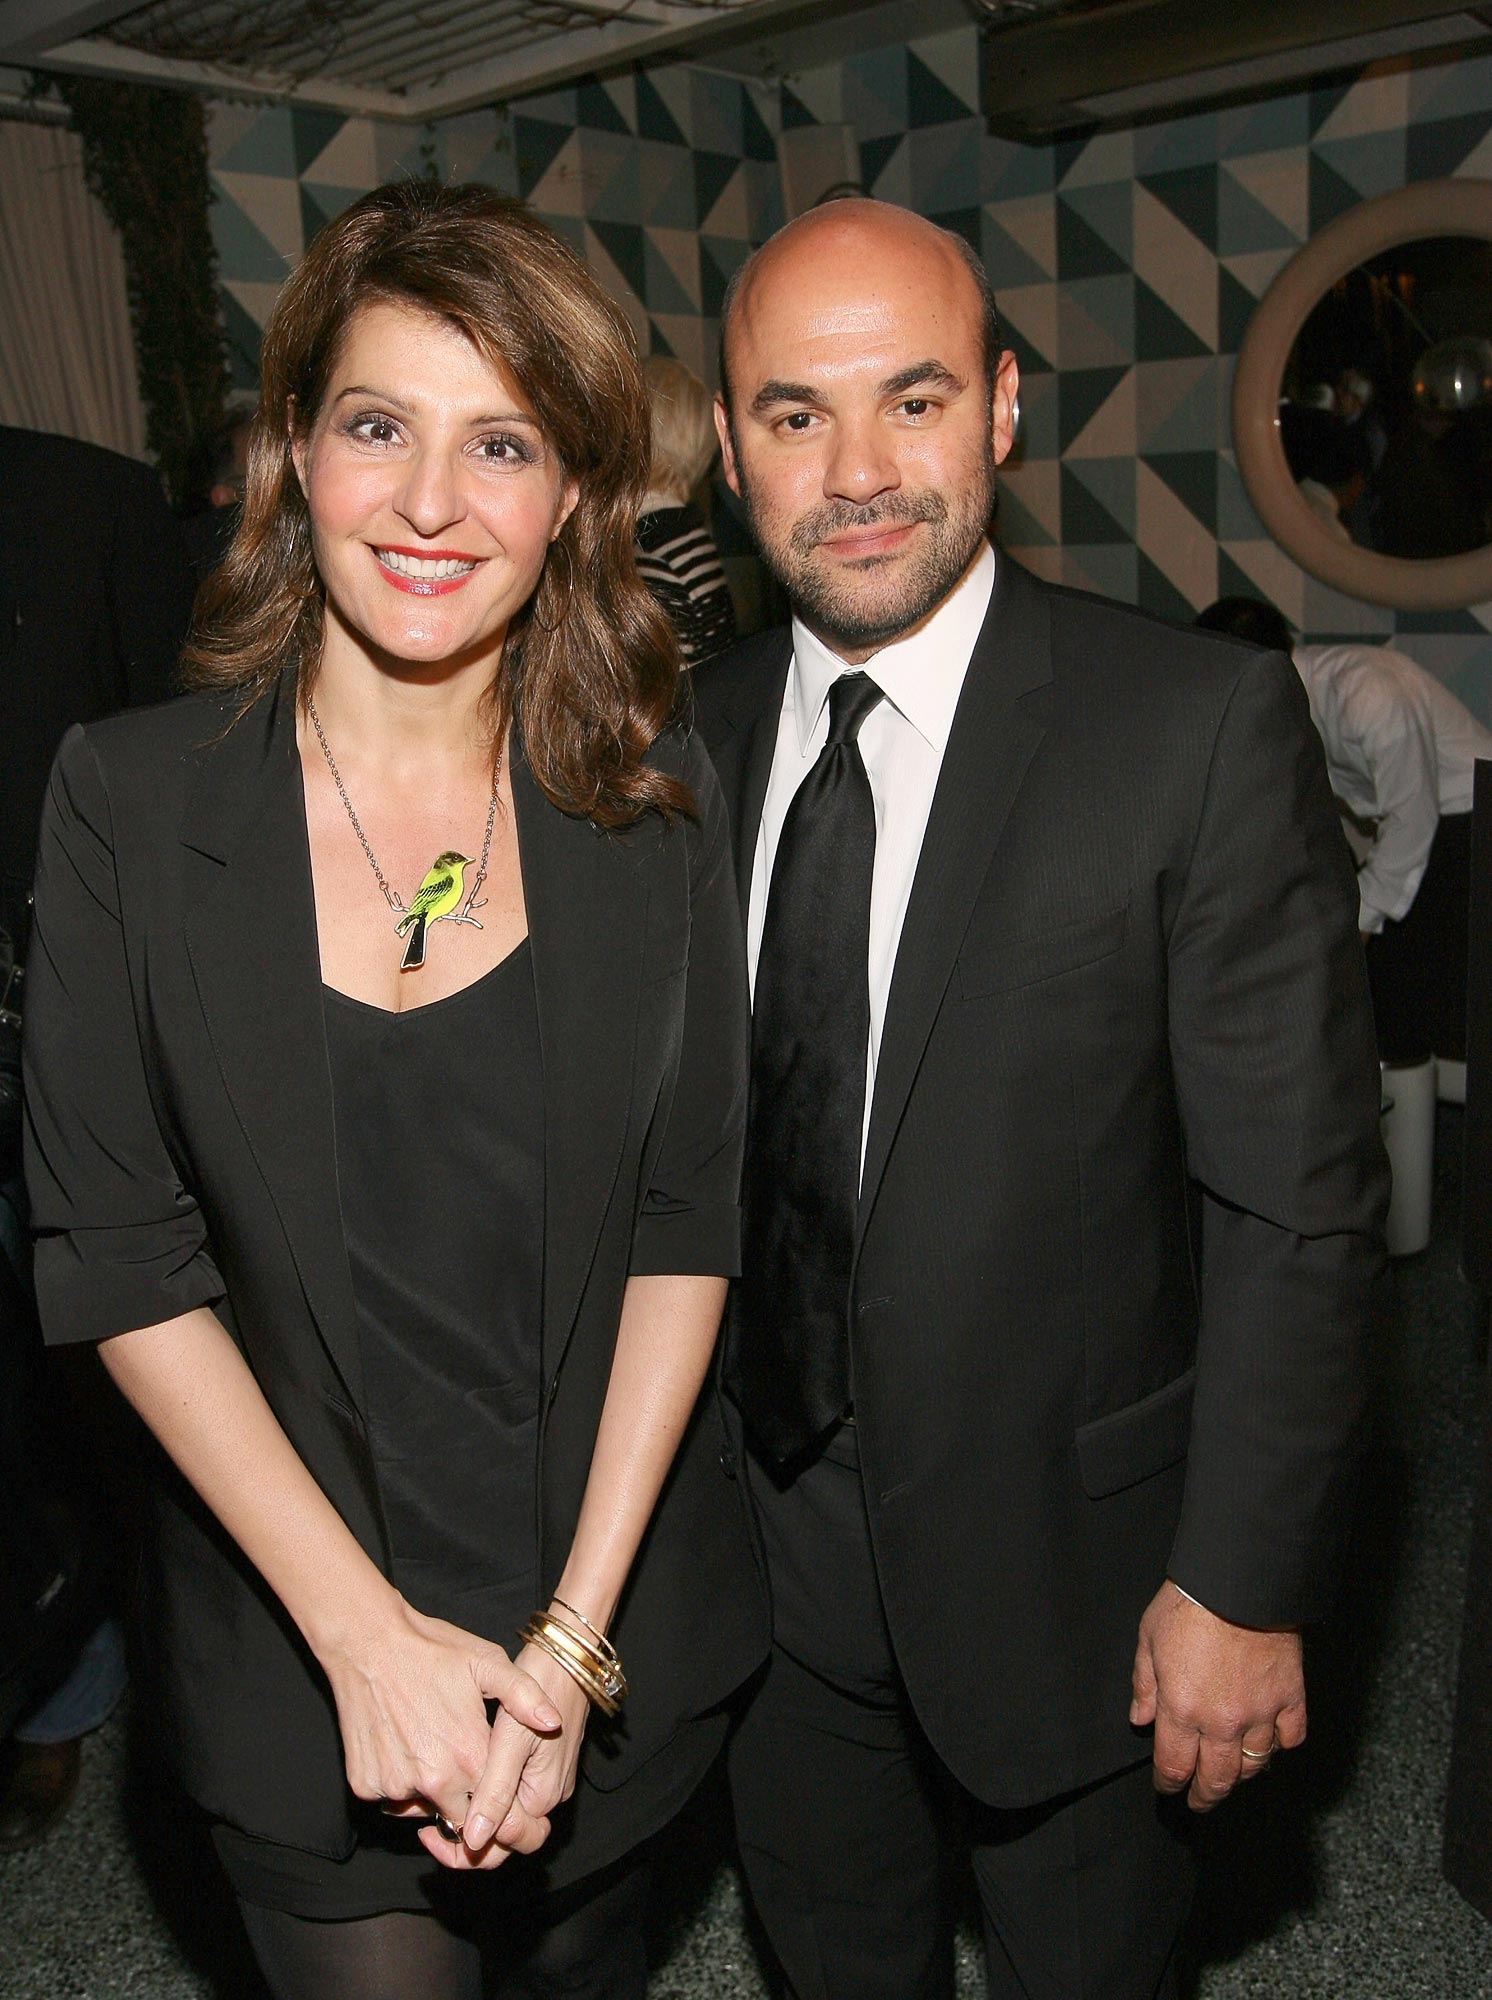 Nia Vardalos and Ian Gomez s Relationship Timeline From Married Costars to Divorce 287